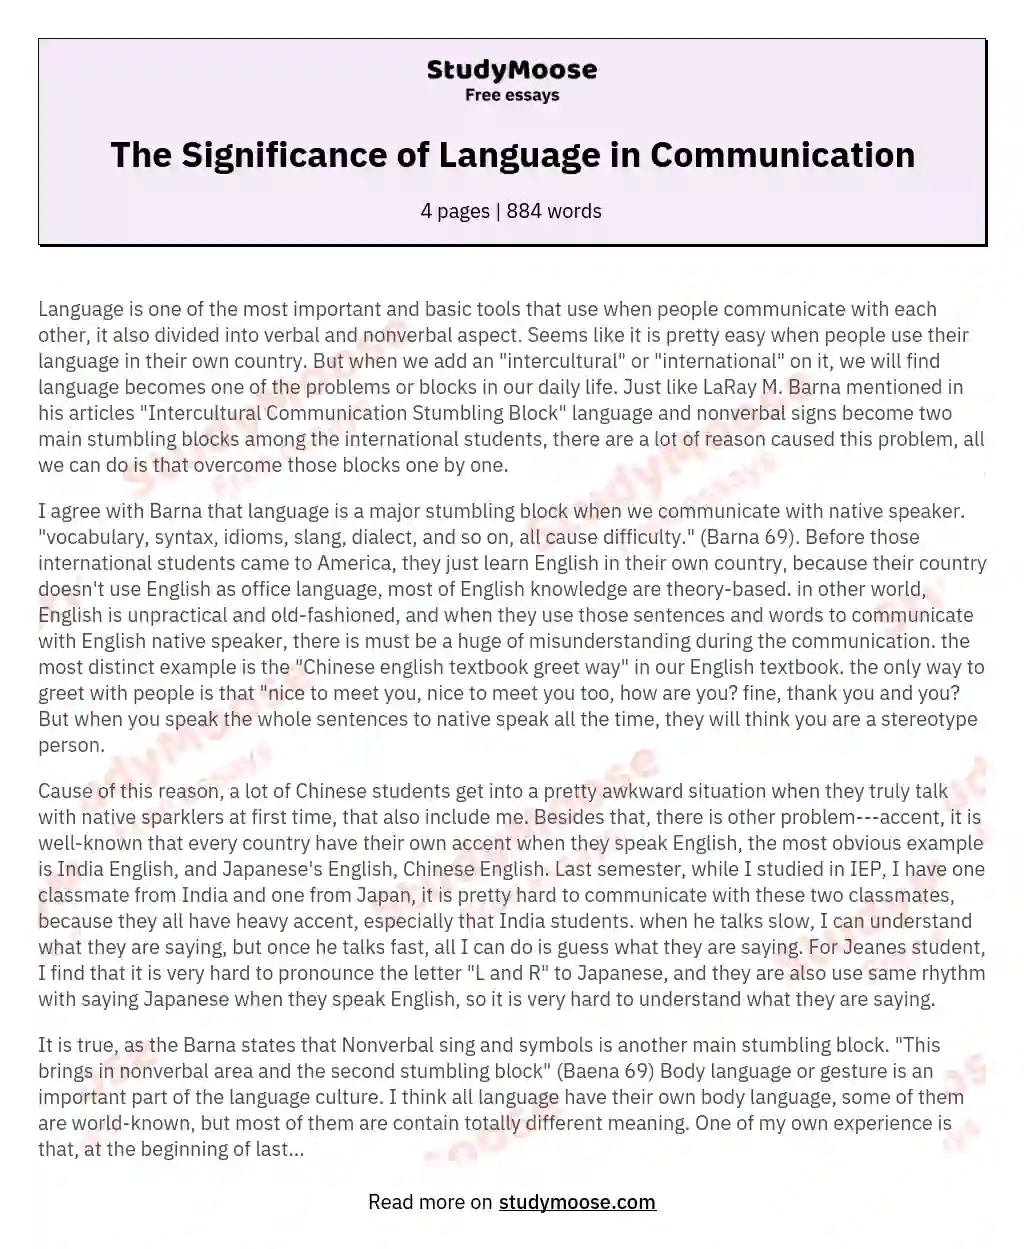 The Significance of Language in Communication essay